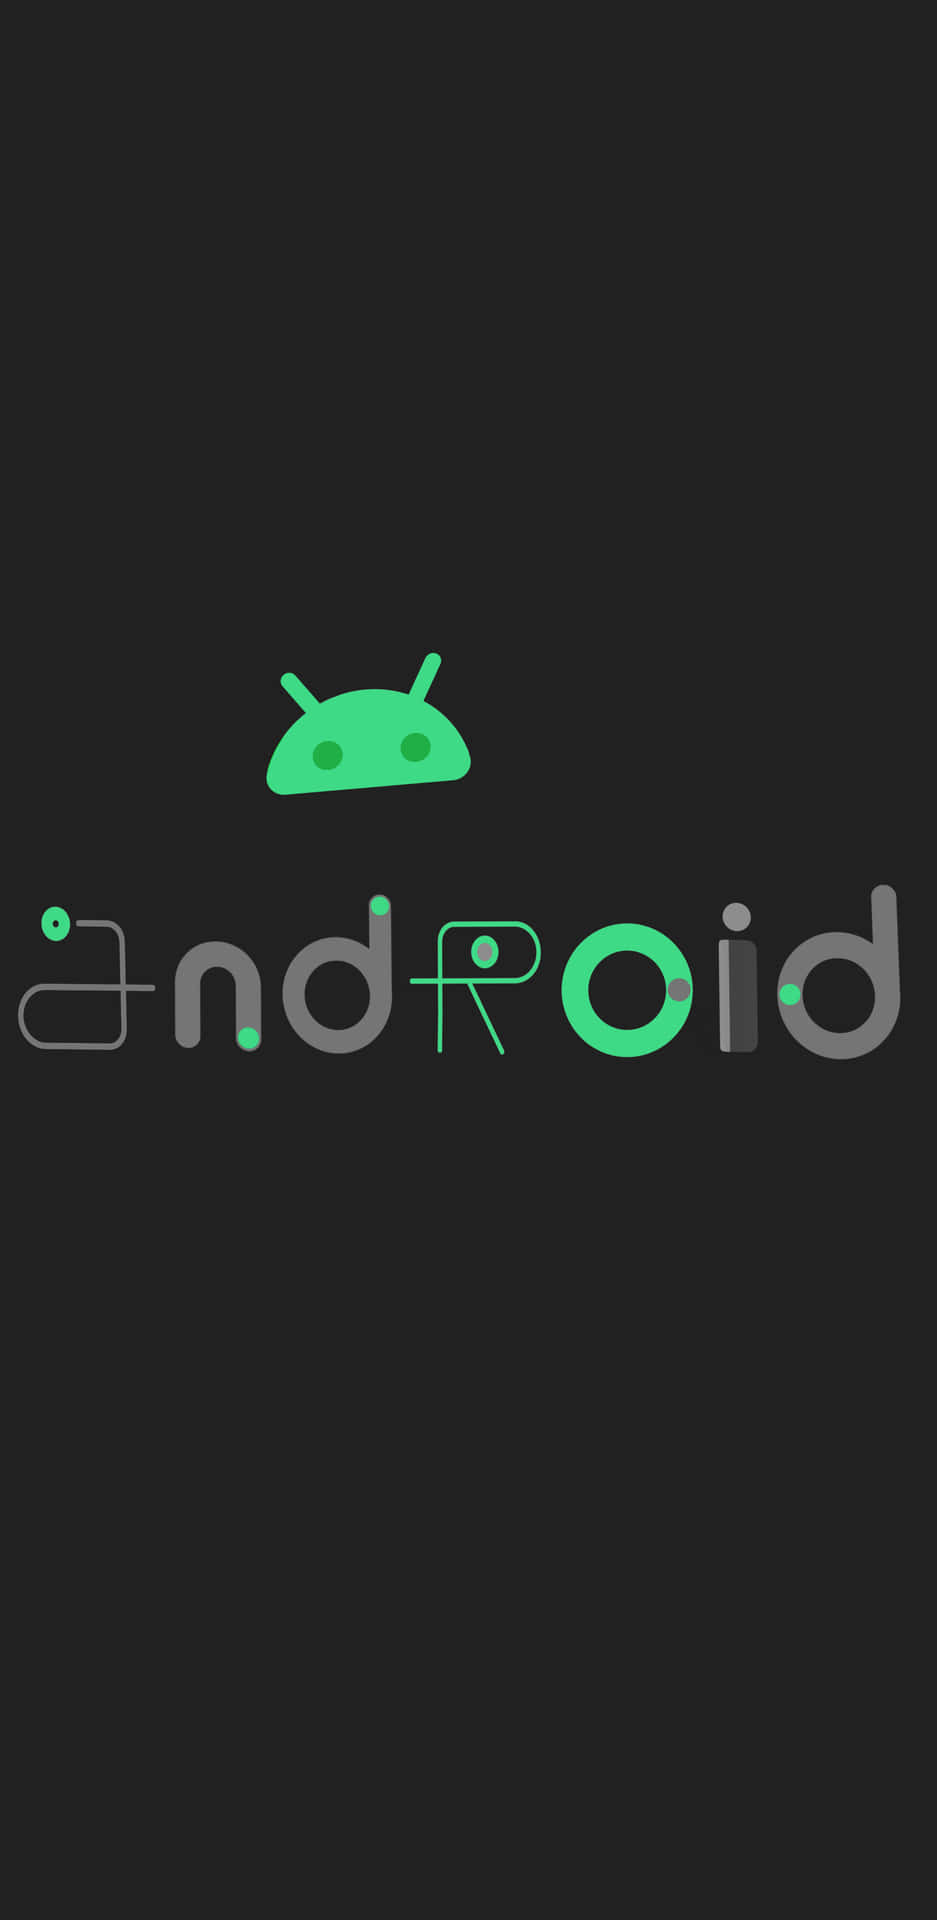 Get the New Android 10 Software Today Wallpaper